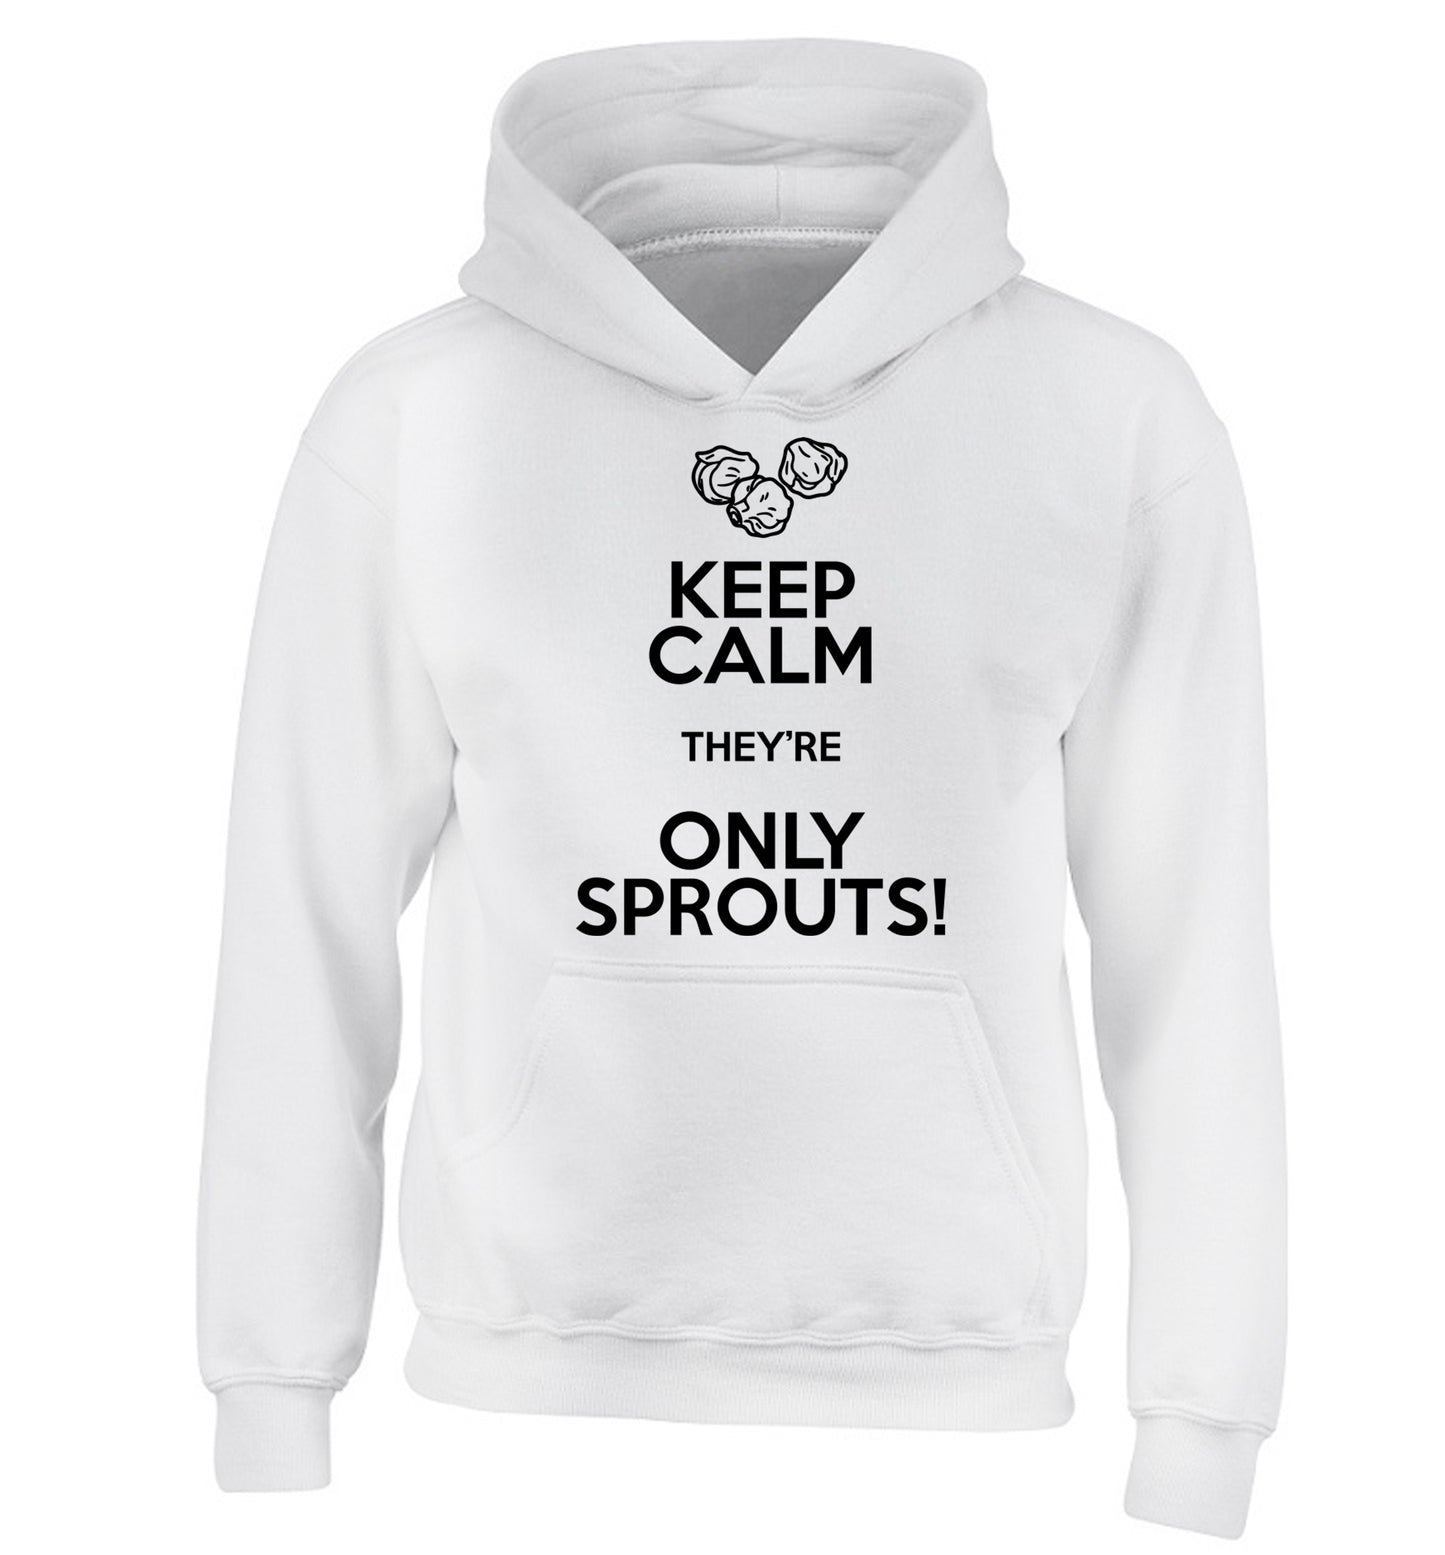 Keep calm they're only sprouts children's white hoodie 12-13 Years